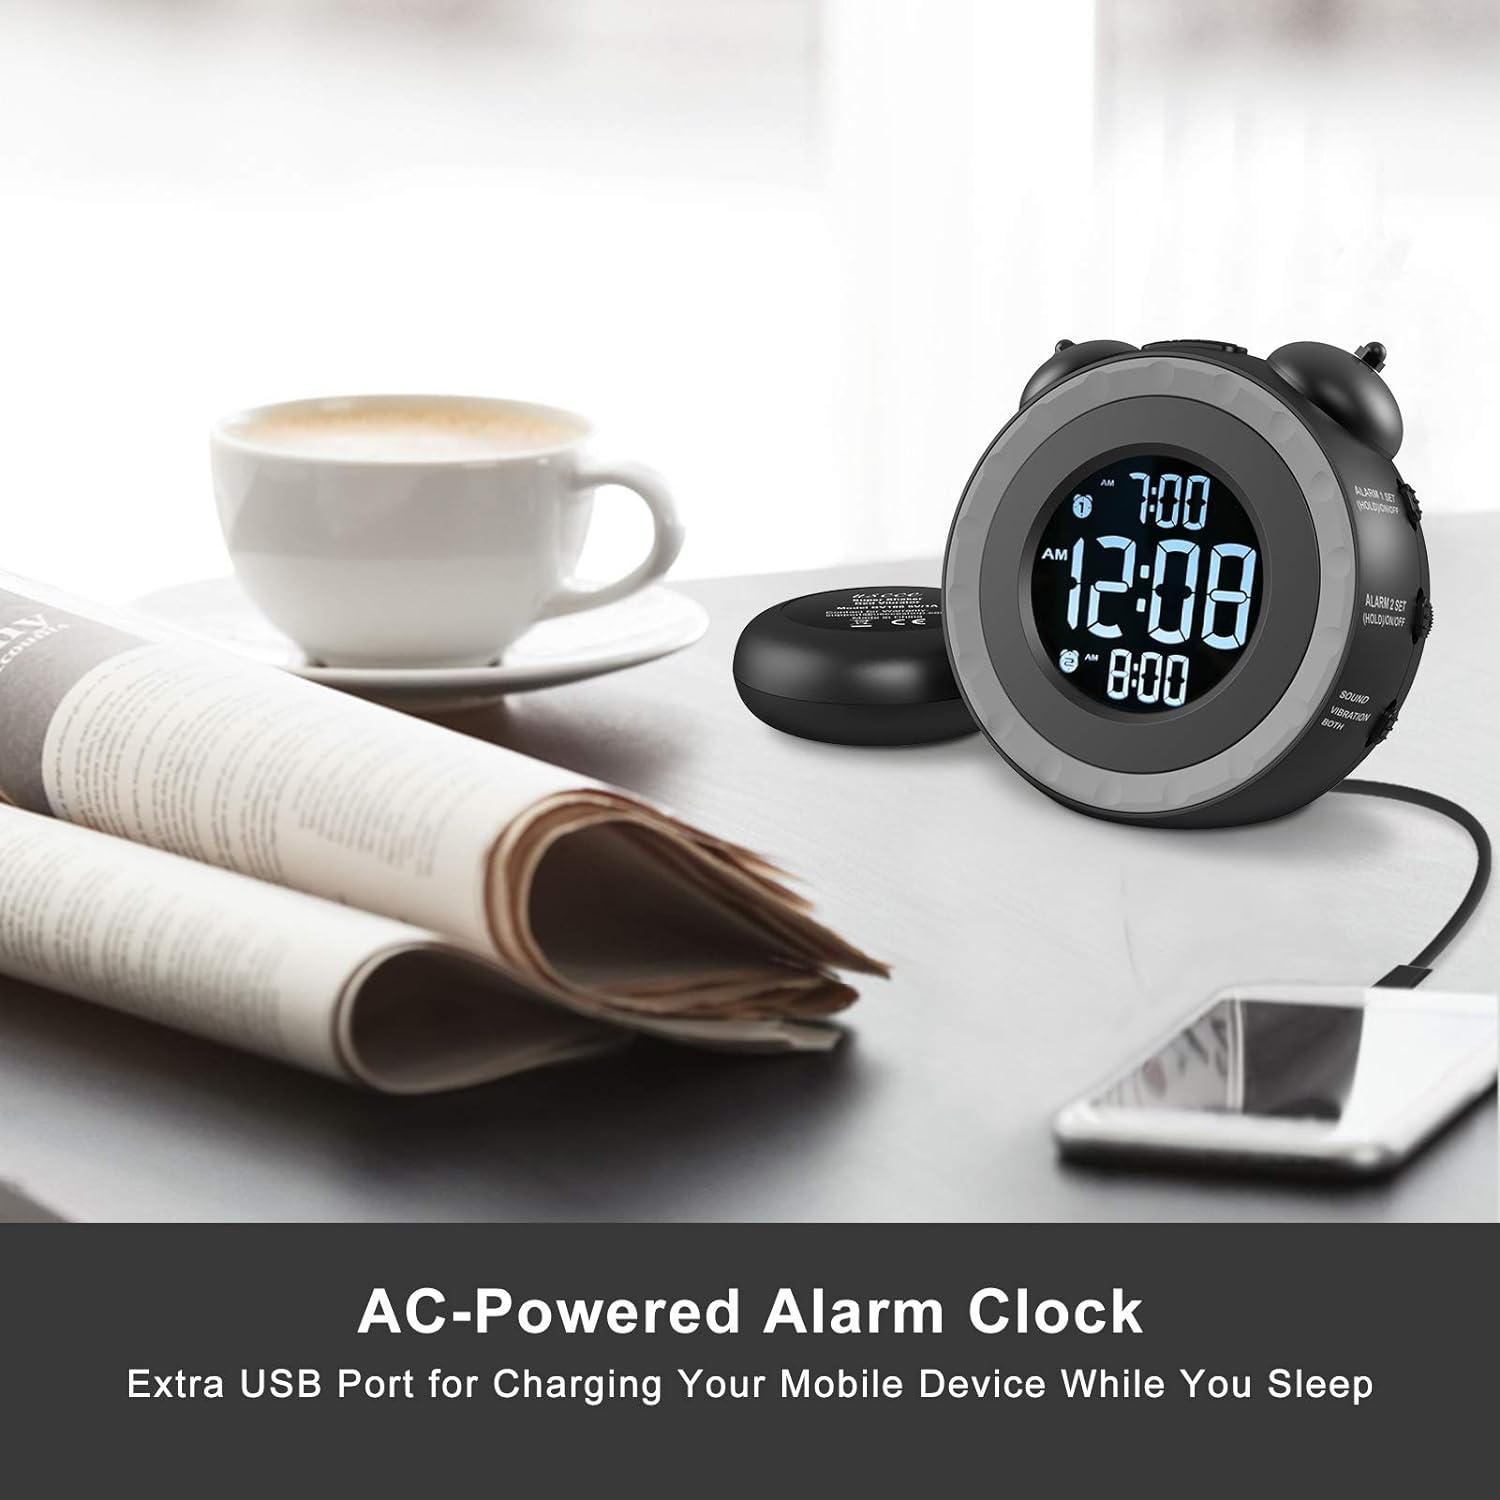 USCCE Loud Dual Alarm Clock with Bed Shaker - 0-100% Dimmer, Vibrating Alarm Clock for Heavy Sleepers or Hearing Impaired, Easy to Set, USB Charging Port, Snooze, Battery Backup